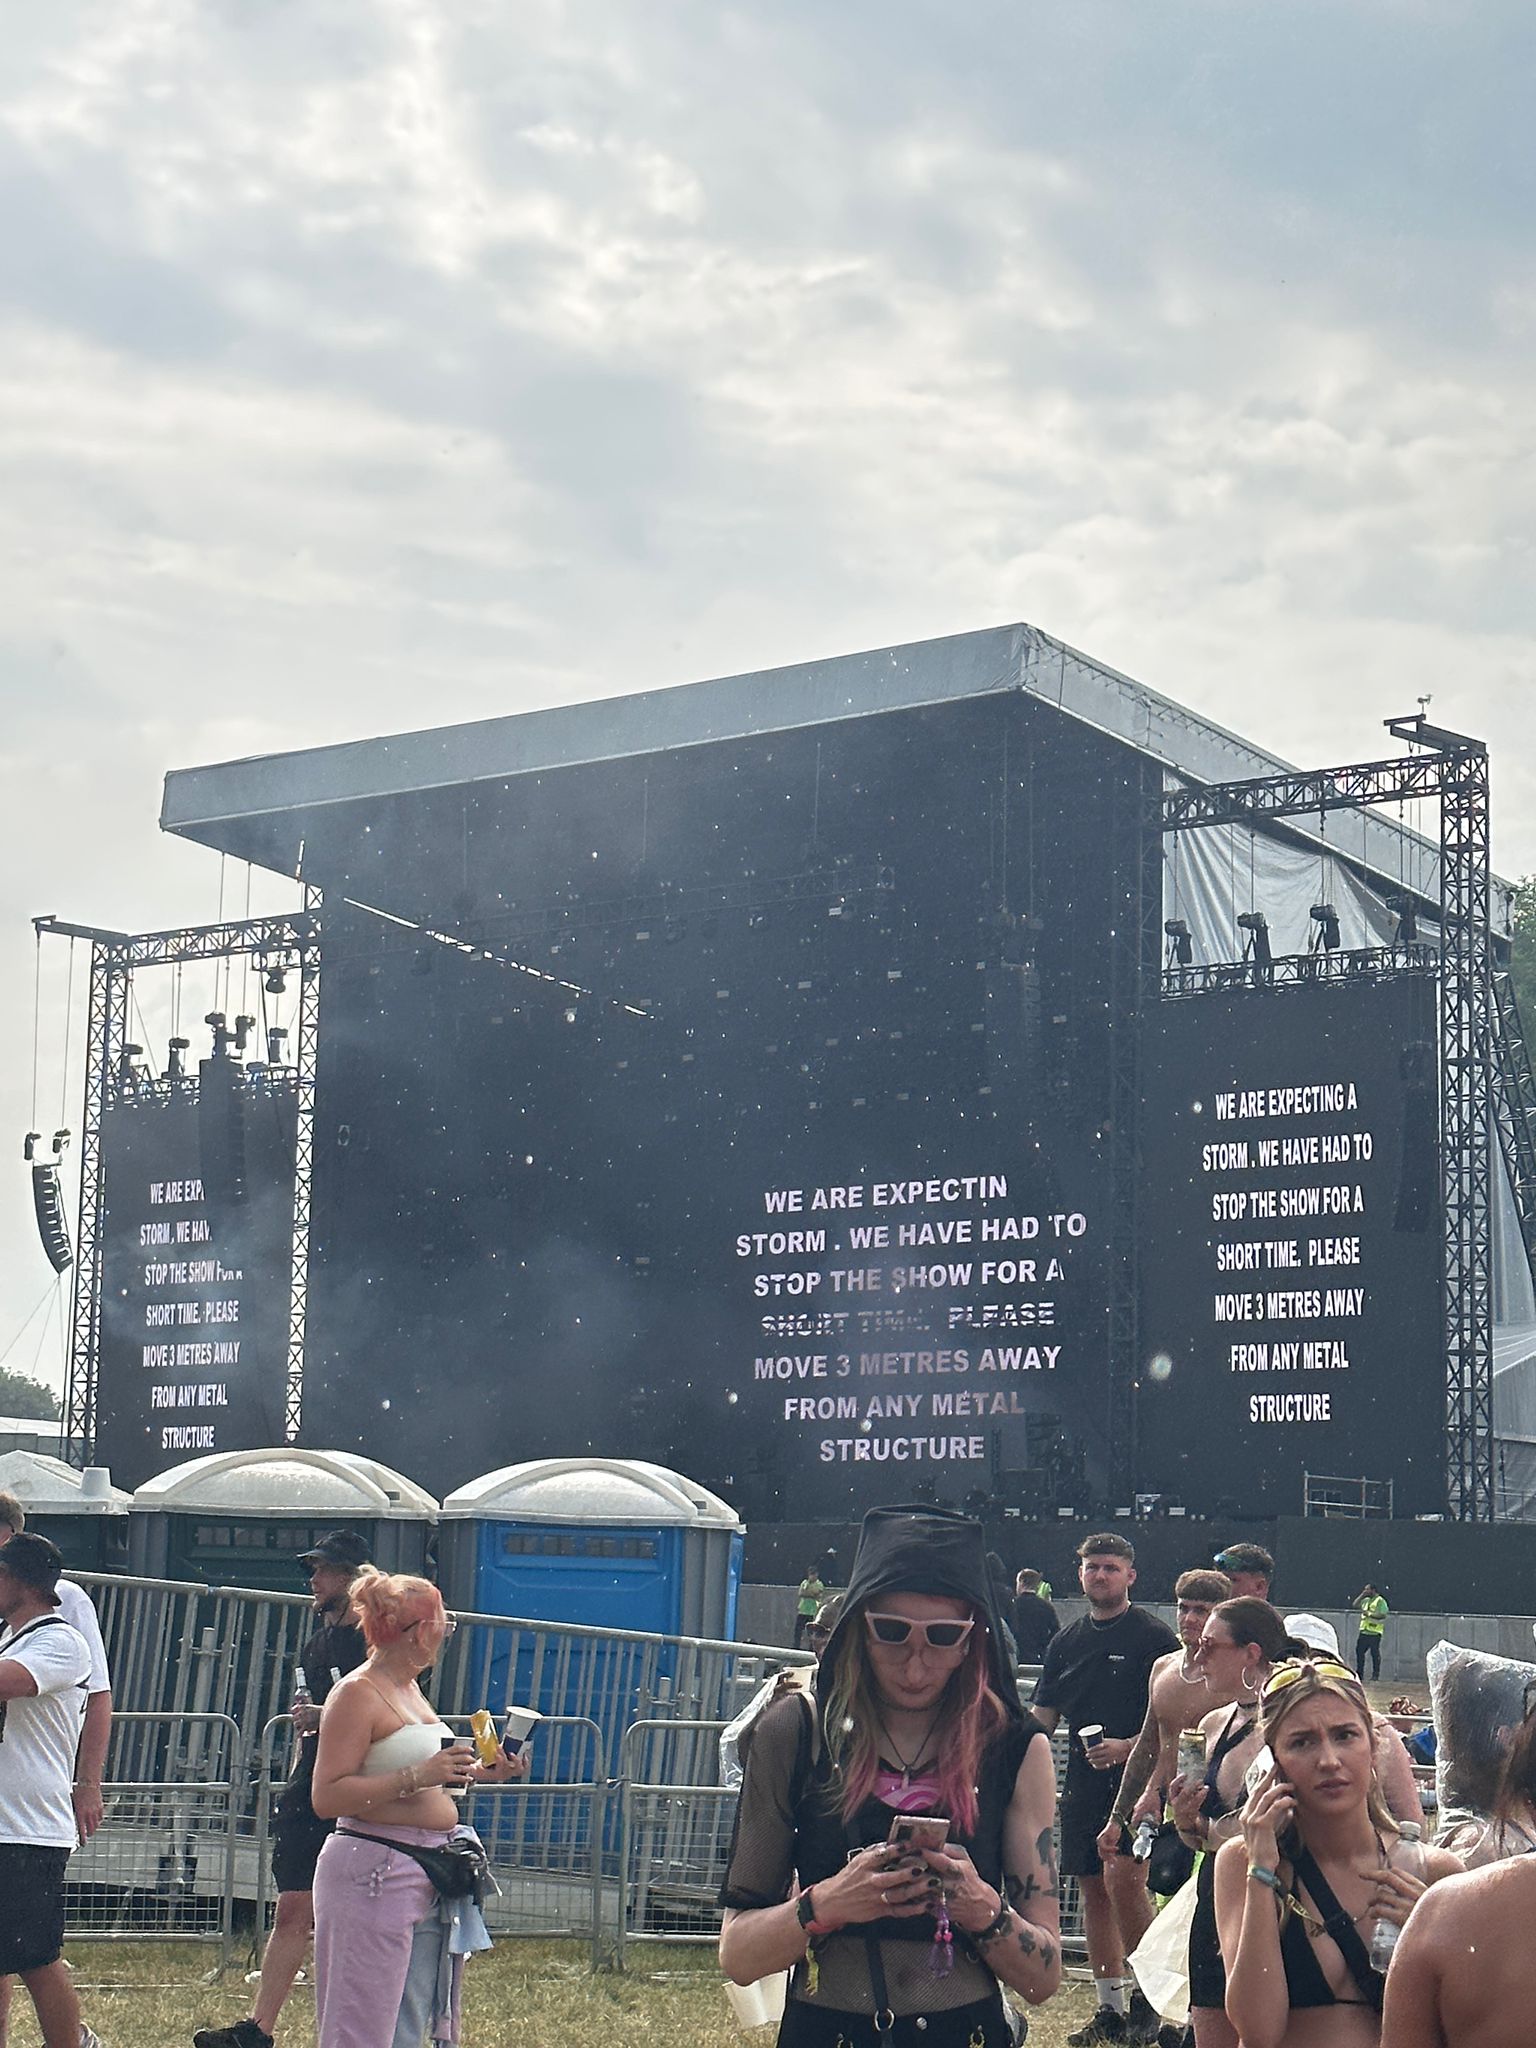 Thunder has been heard over the Parklife festival site.